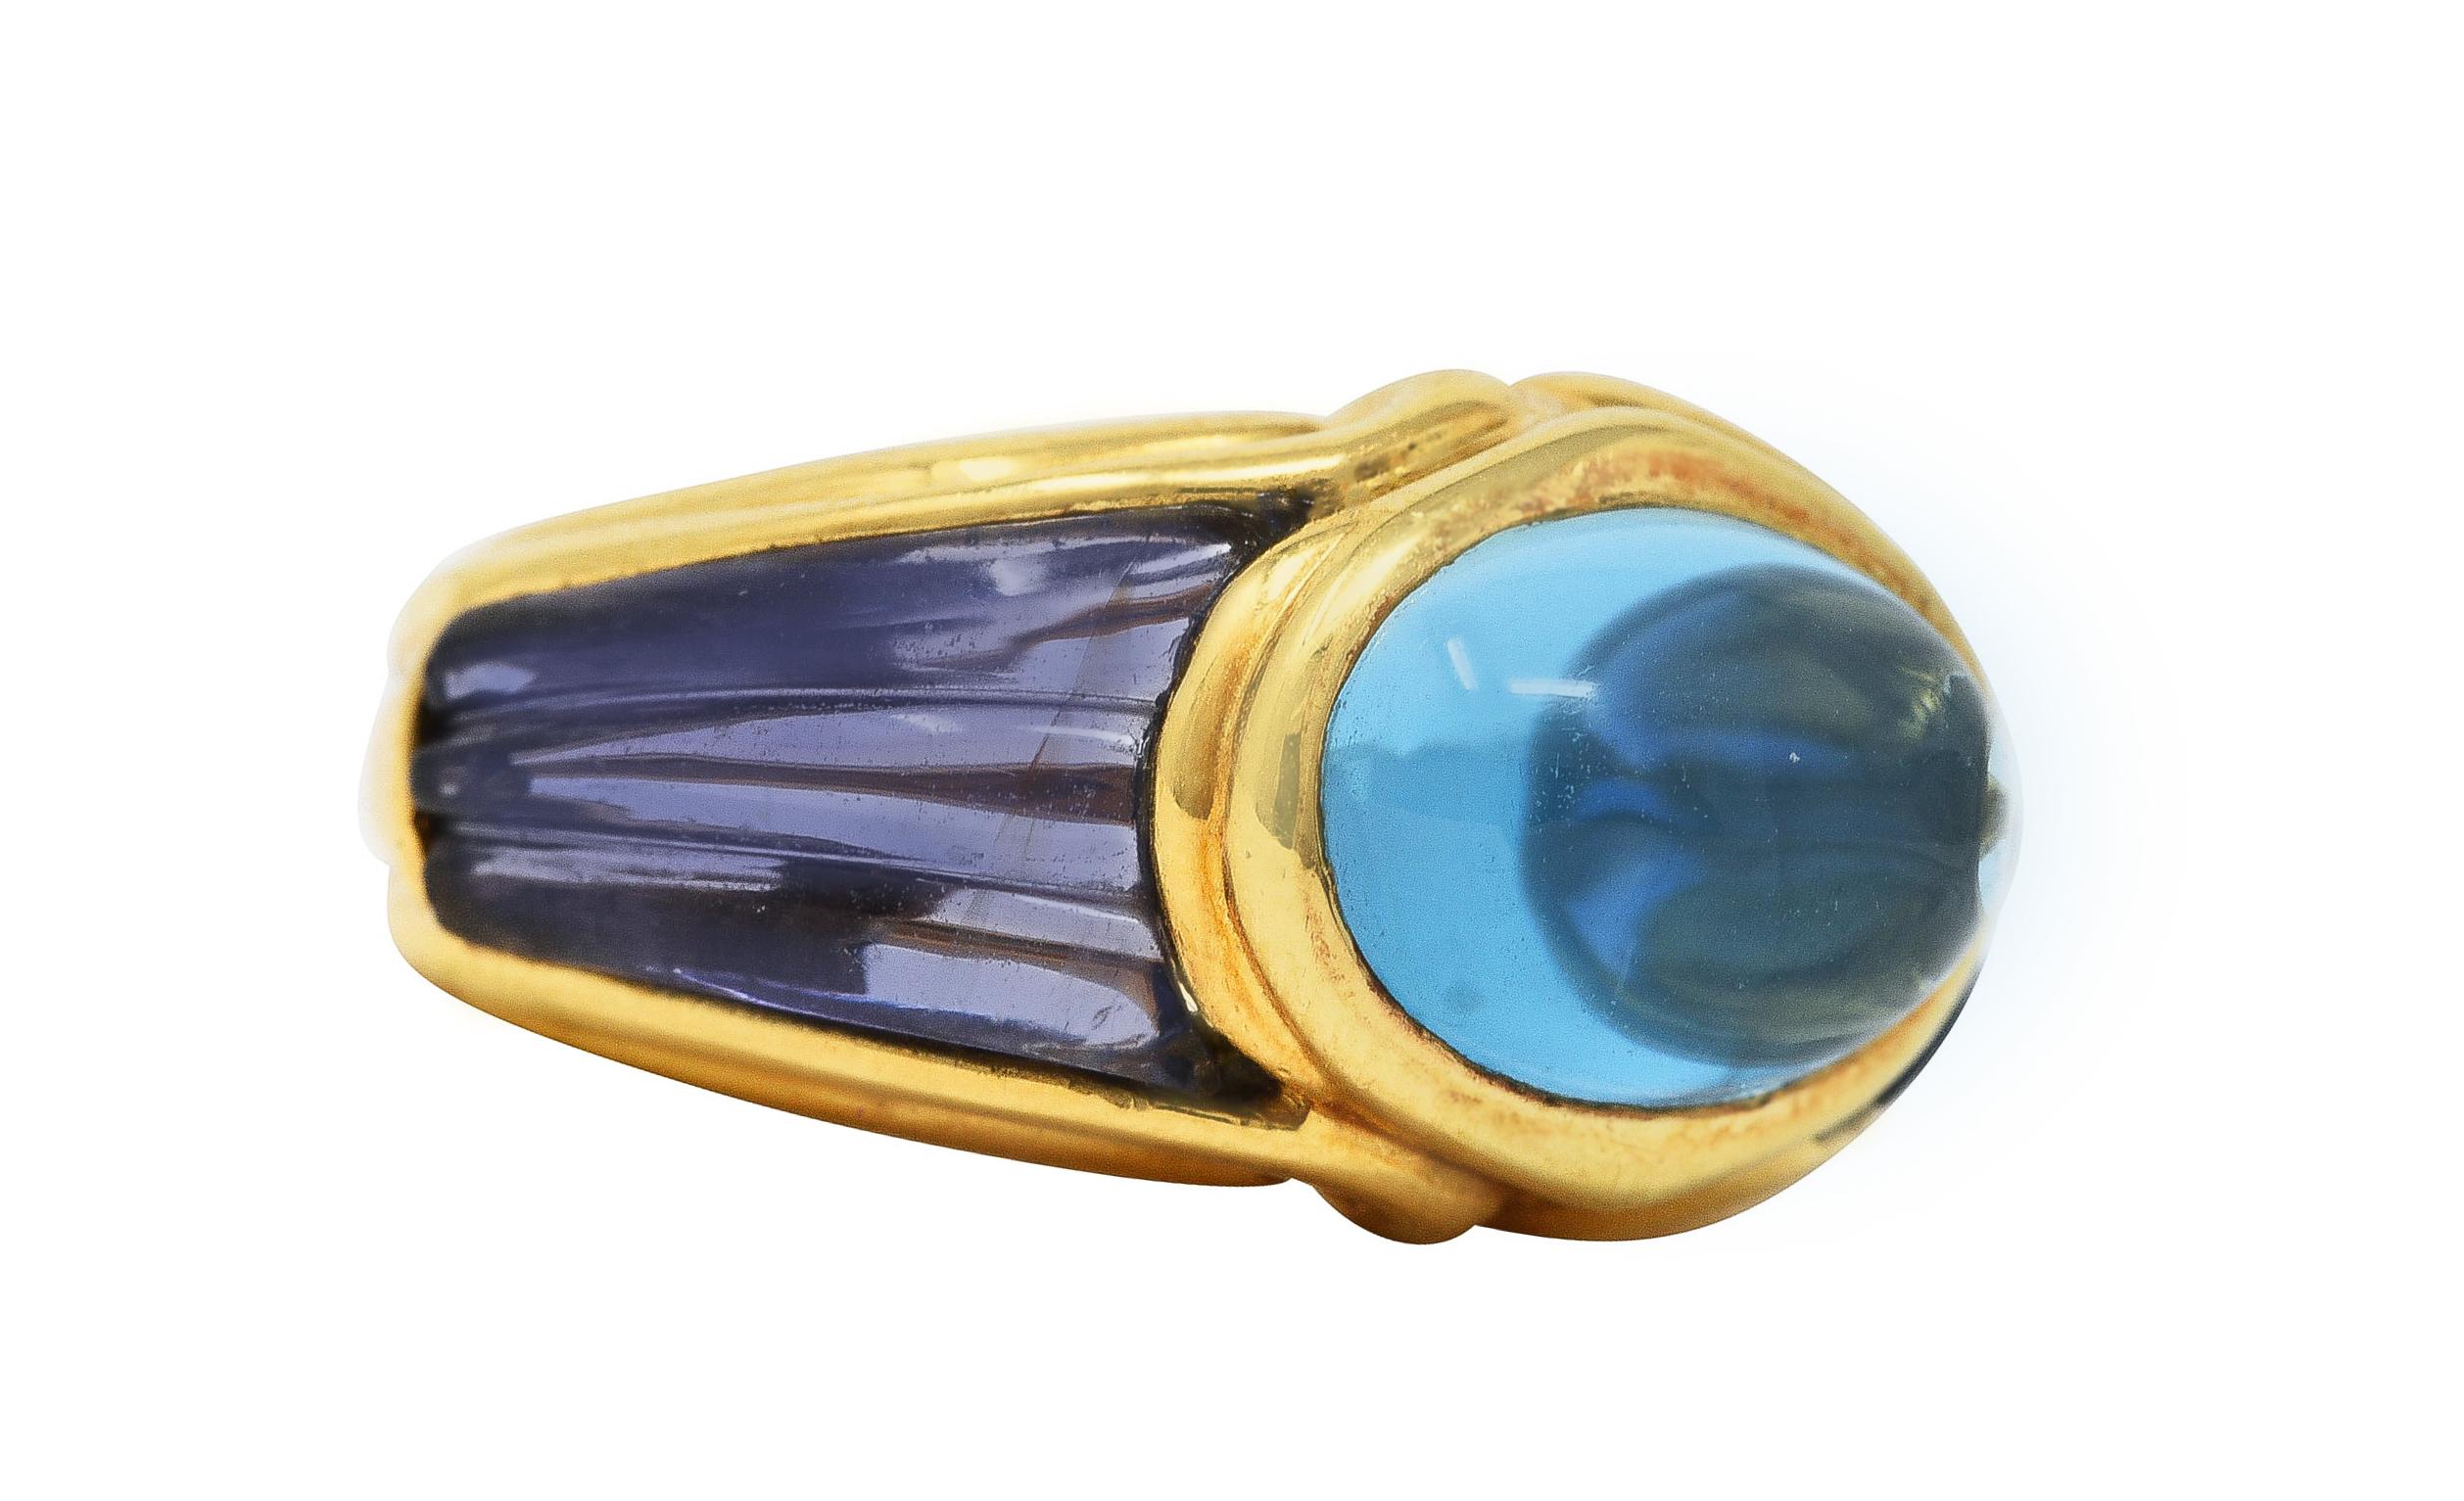 Gold band ring centers an oval cabochon blue topaz measuring approximately 10.5 x 7.5 mm. Transparent medium light sky blue. Bezel set in a polished gold surround. Shoulders are inset with carved iolite measuring approximately 11.5 x 6.5 mm. Deeply